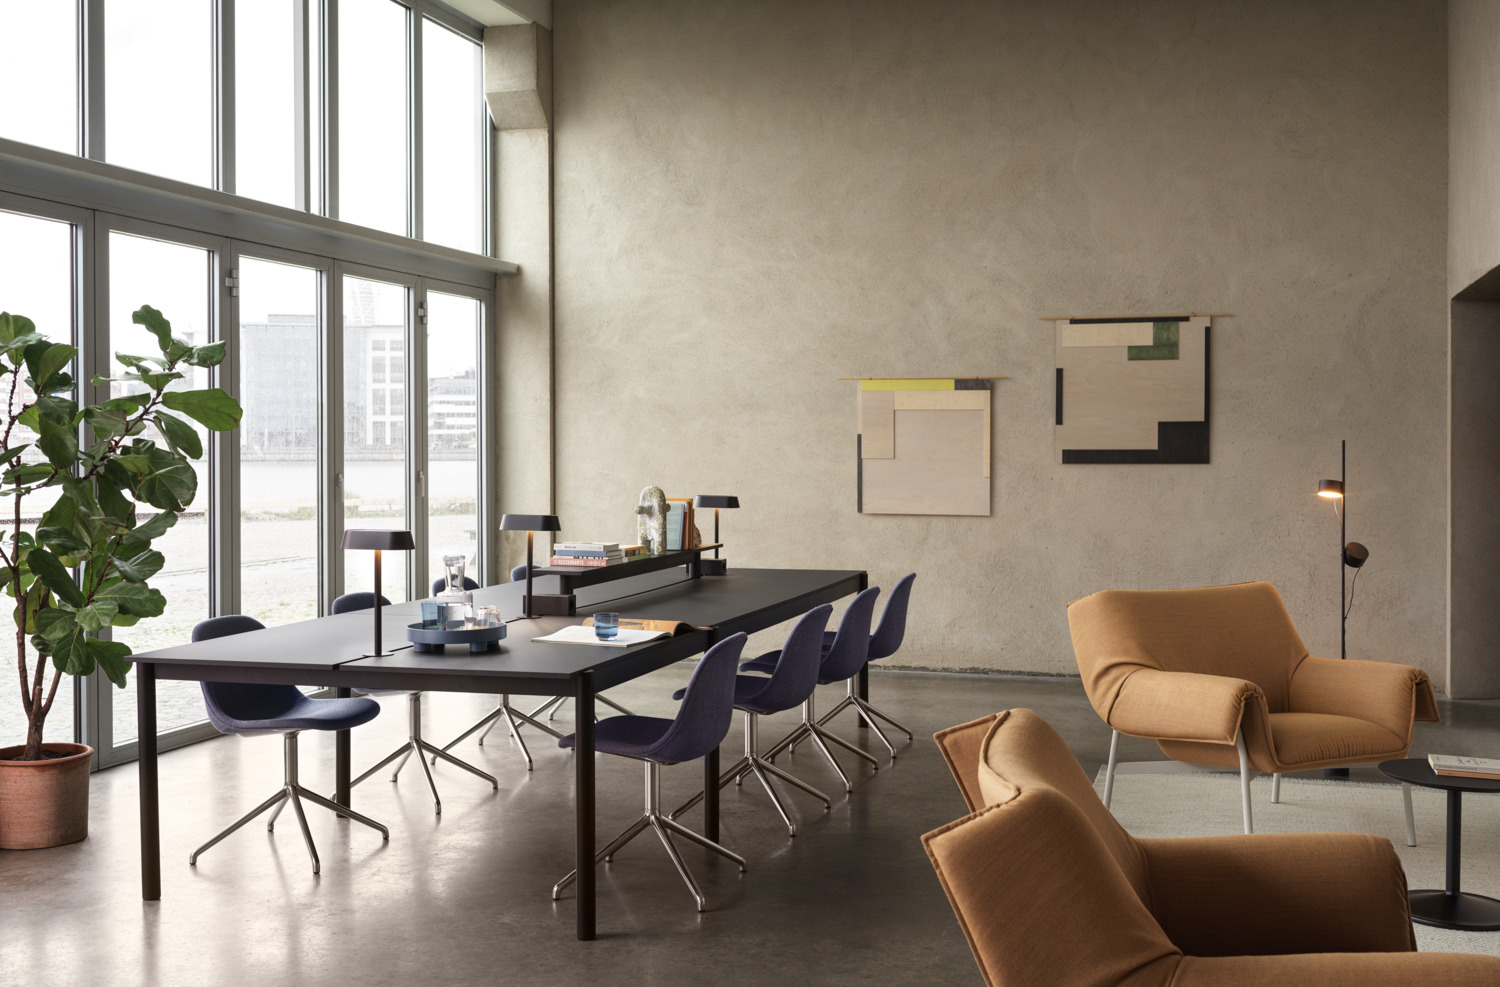 Linear System Table Config. 1 in Black/Black, Fiber Side Chair w. Swivel Base in Sabi 631/Aluminium, Wrap Lounge Chair in Fiord 451/Grey, Ply Rug in Off-White, Platform Tray in Blue-Grey, Raise Glasses in Dark Blue, Raise Carafe in Clear, Soft Side Table Ø41 cm in Black/Black, Post Floor Lamp in Black